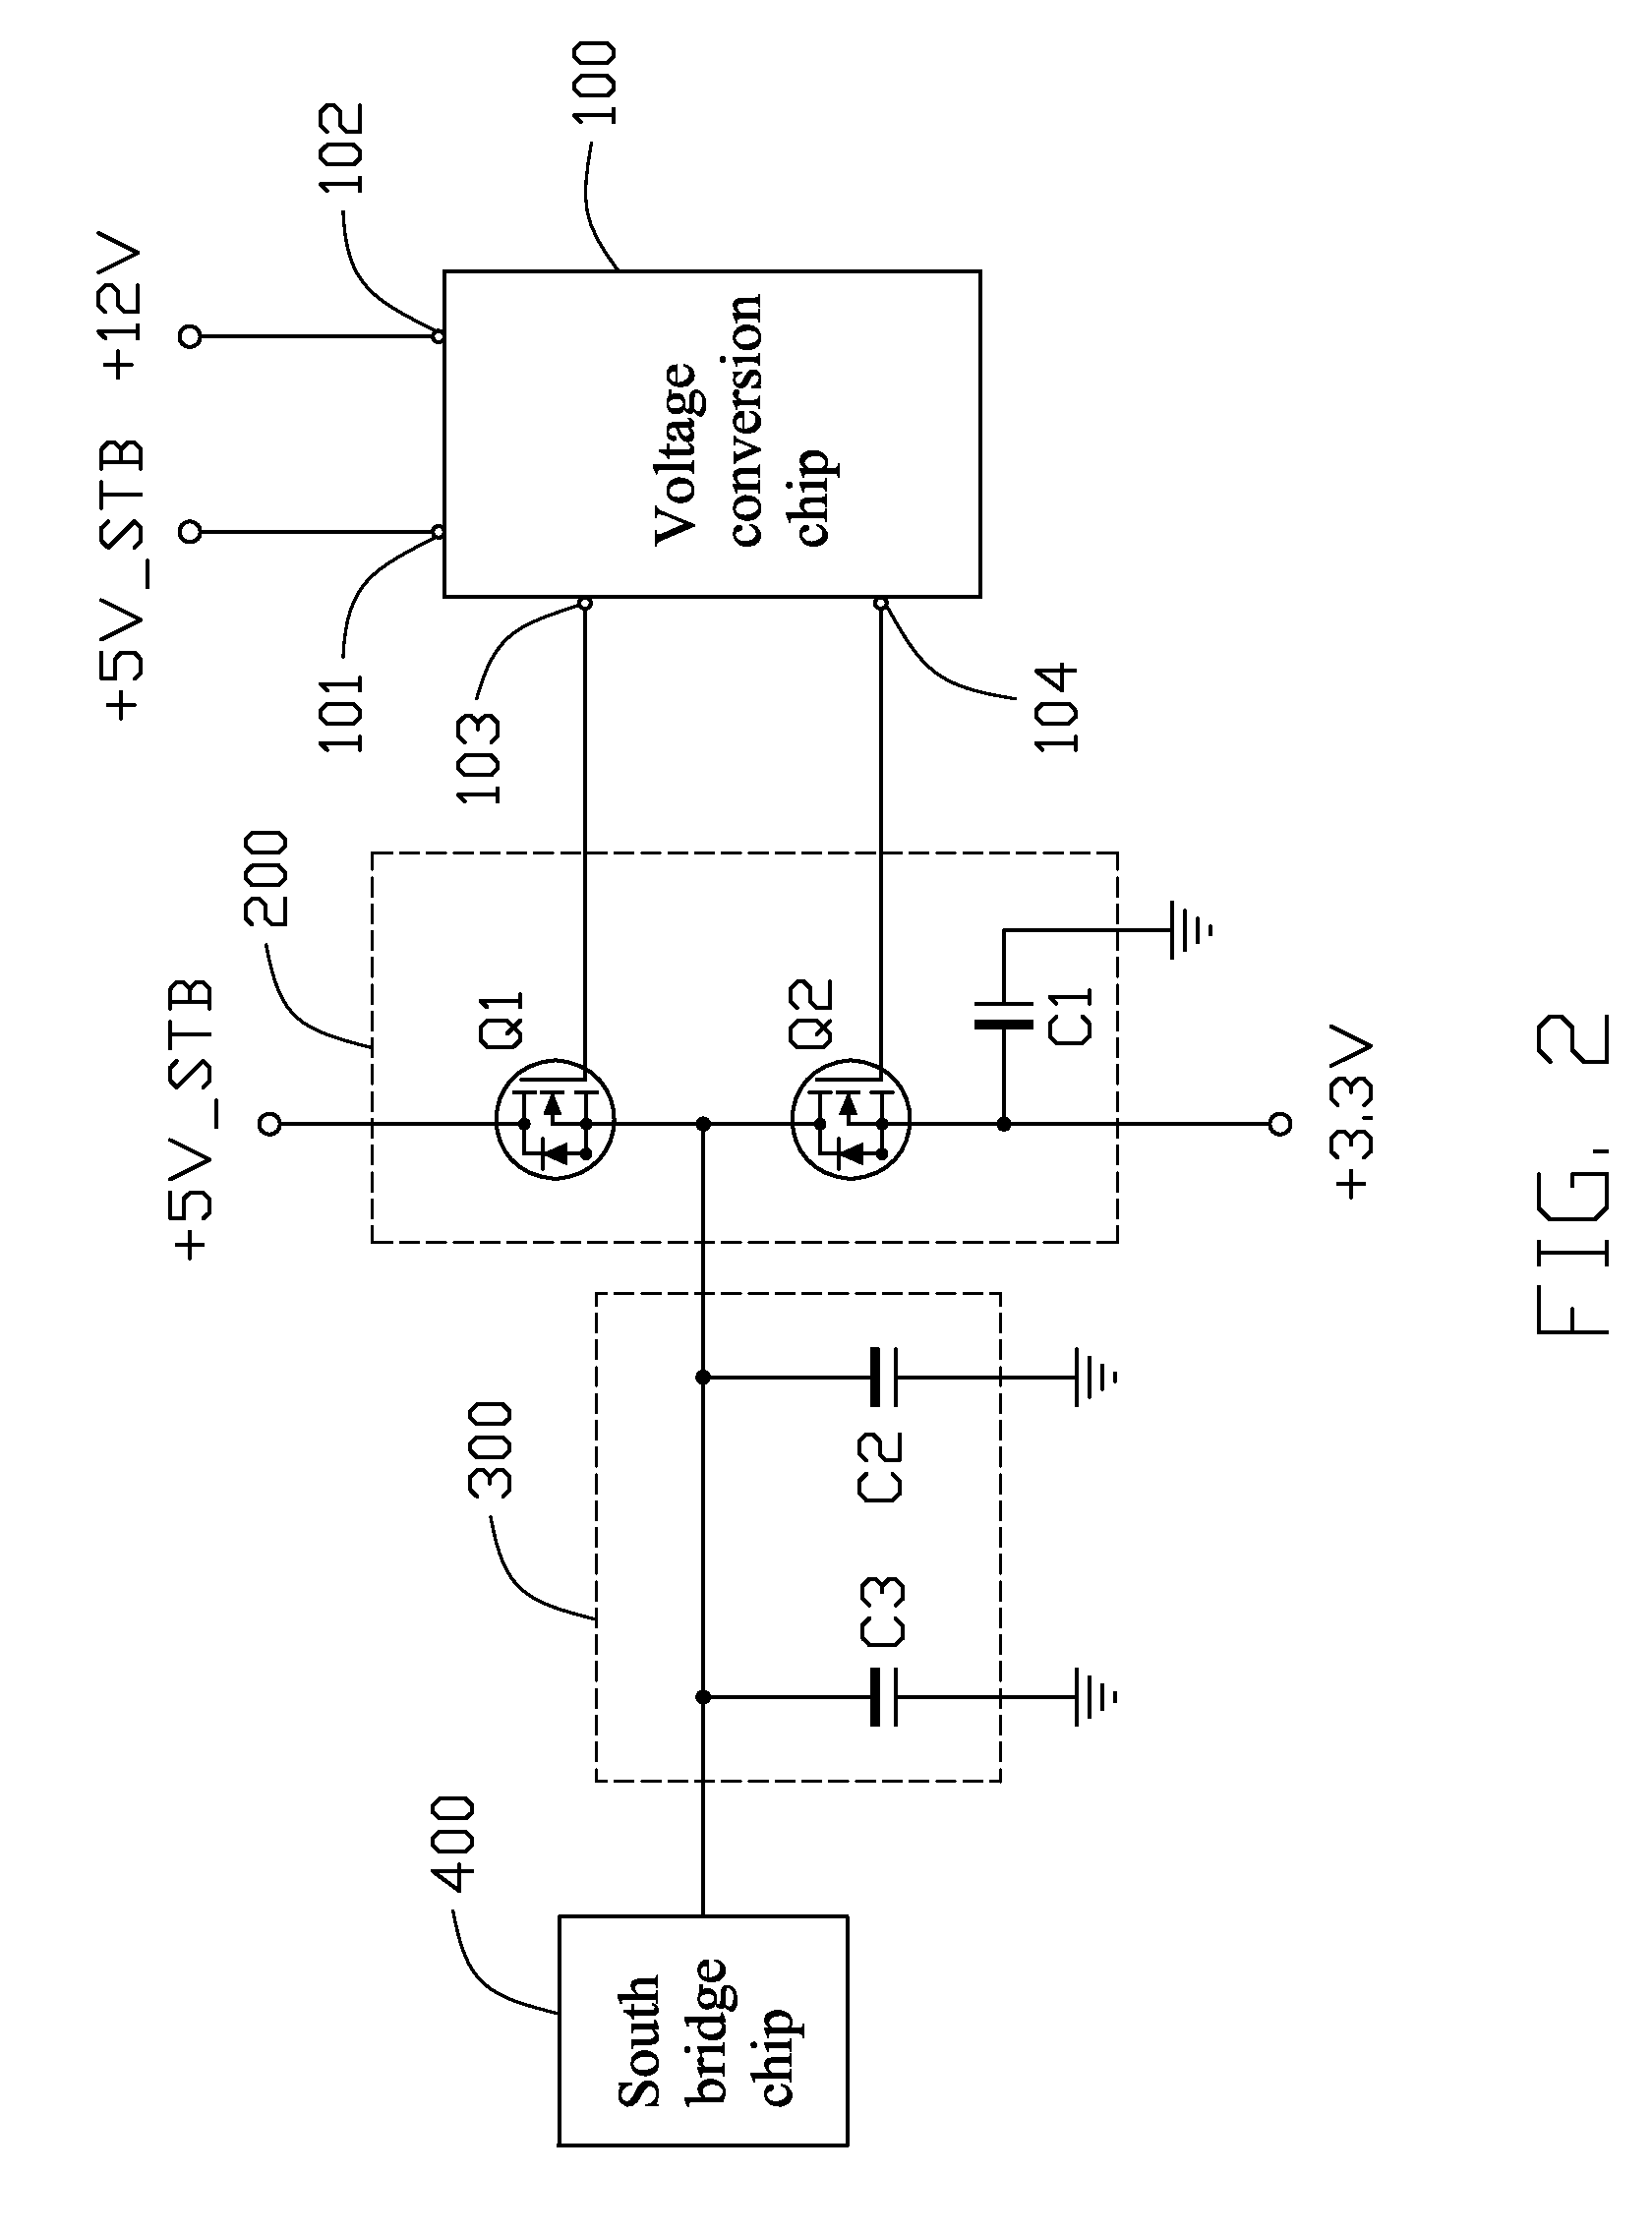 Power supply circuit for south bridge chip